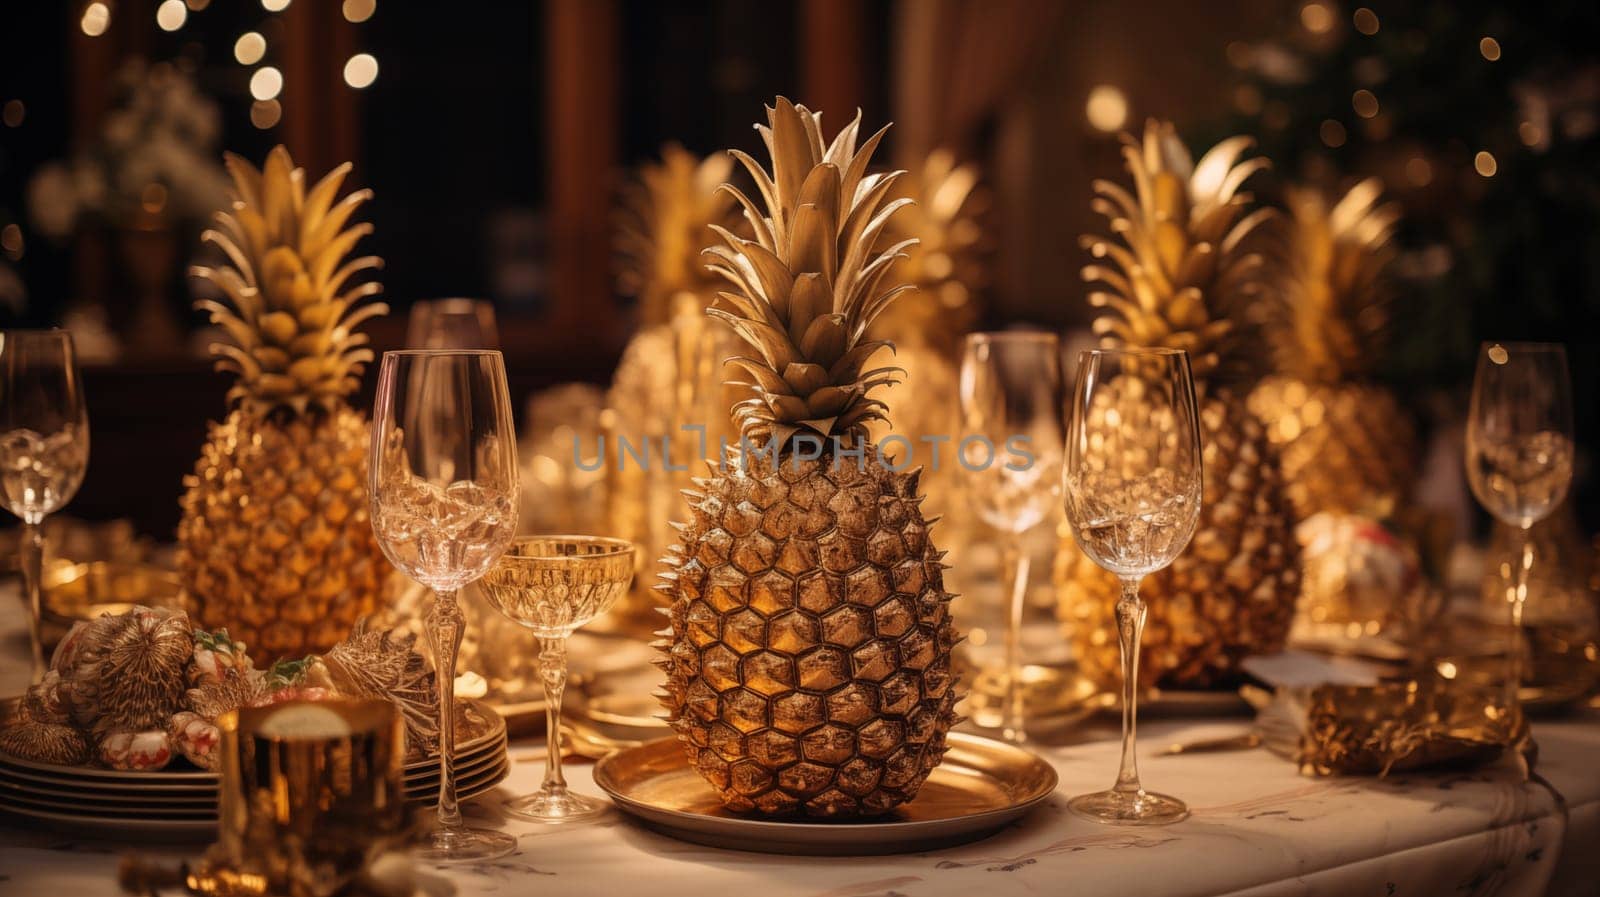 several golden pineapples stand on plates on the table, next to glasses of champagne, warm evening light.